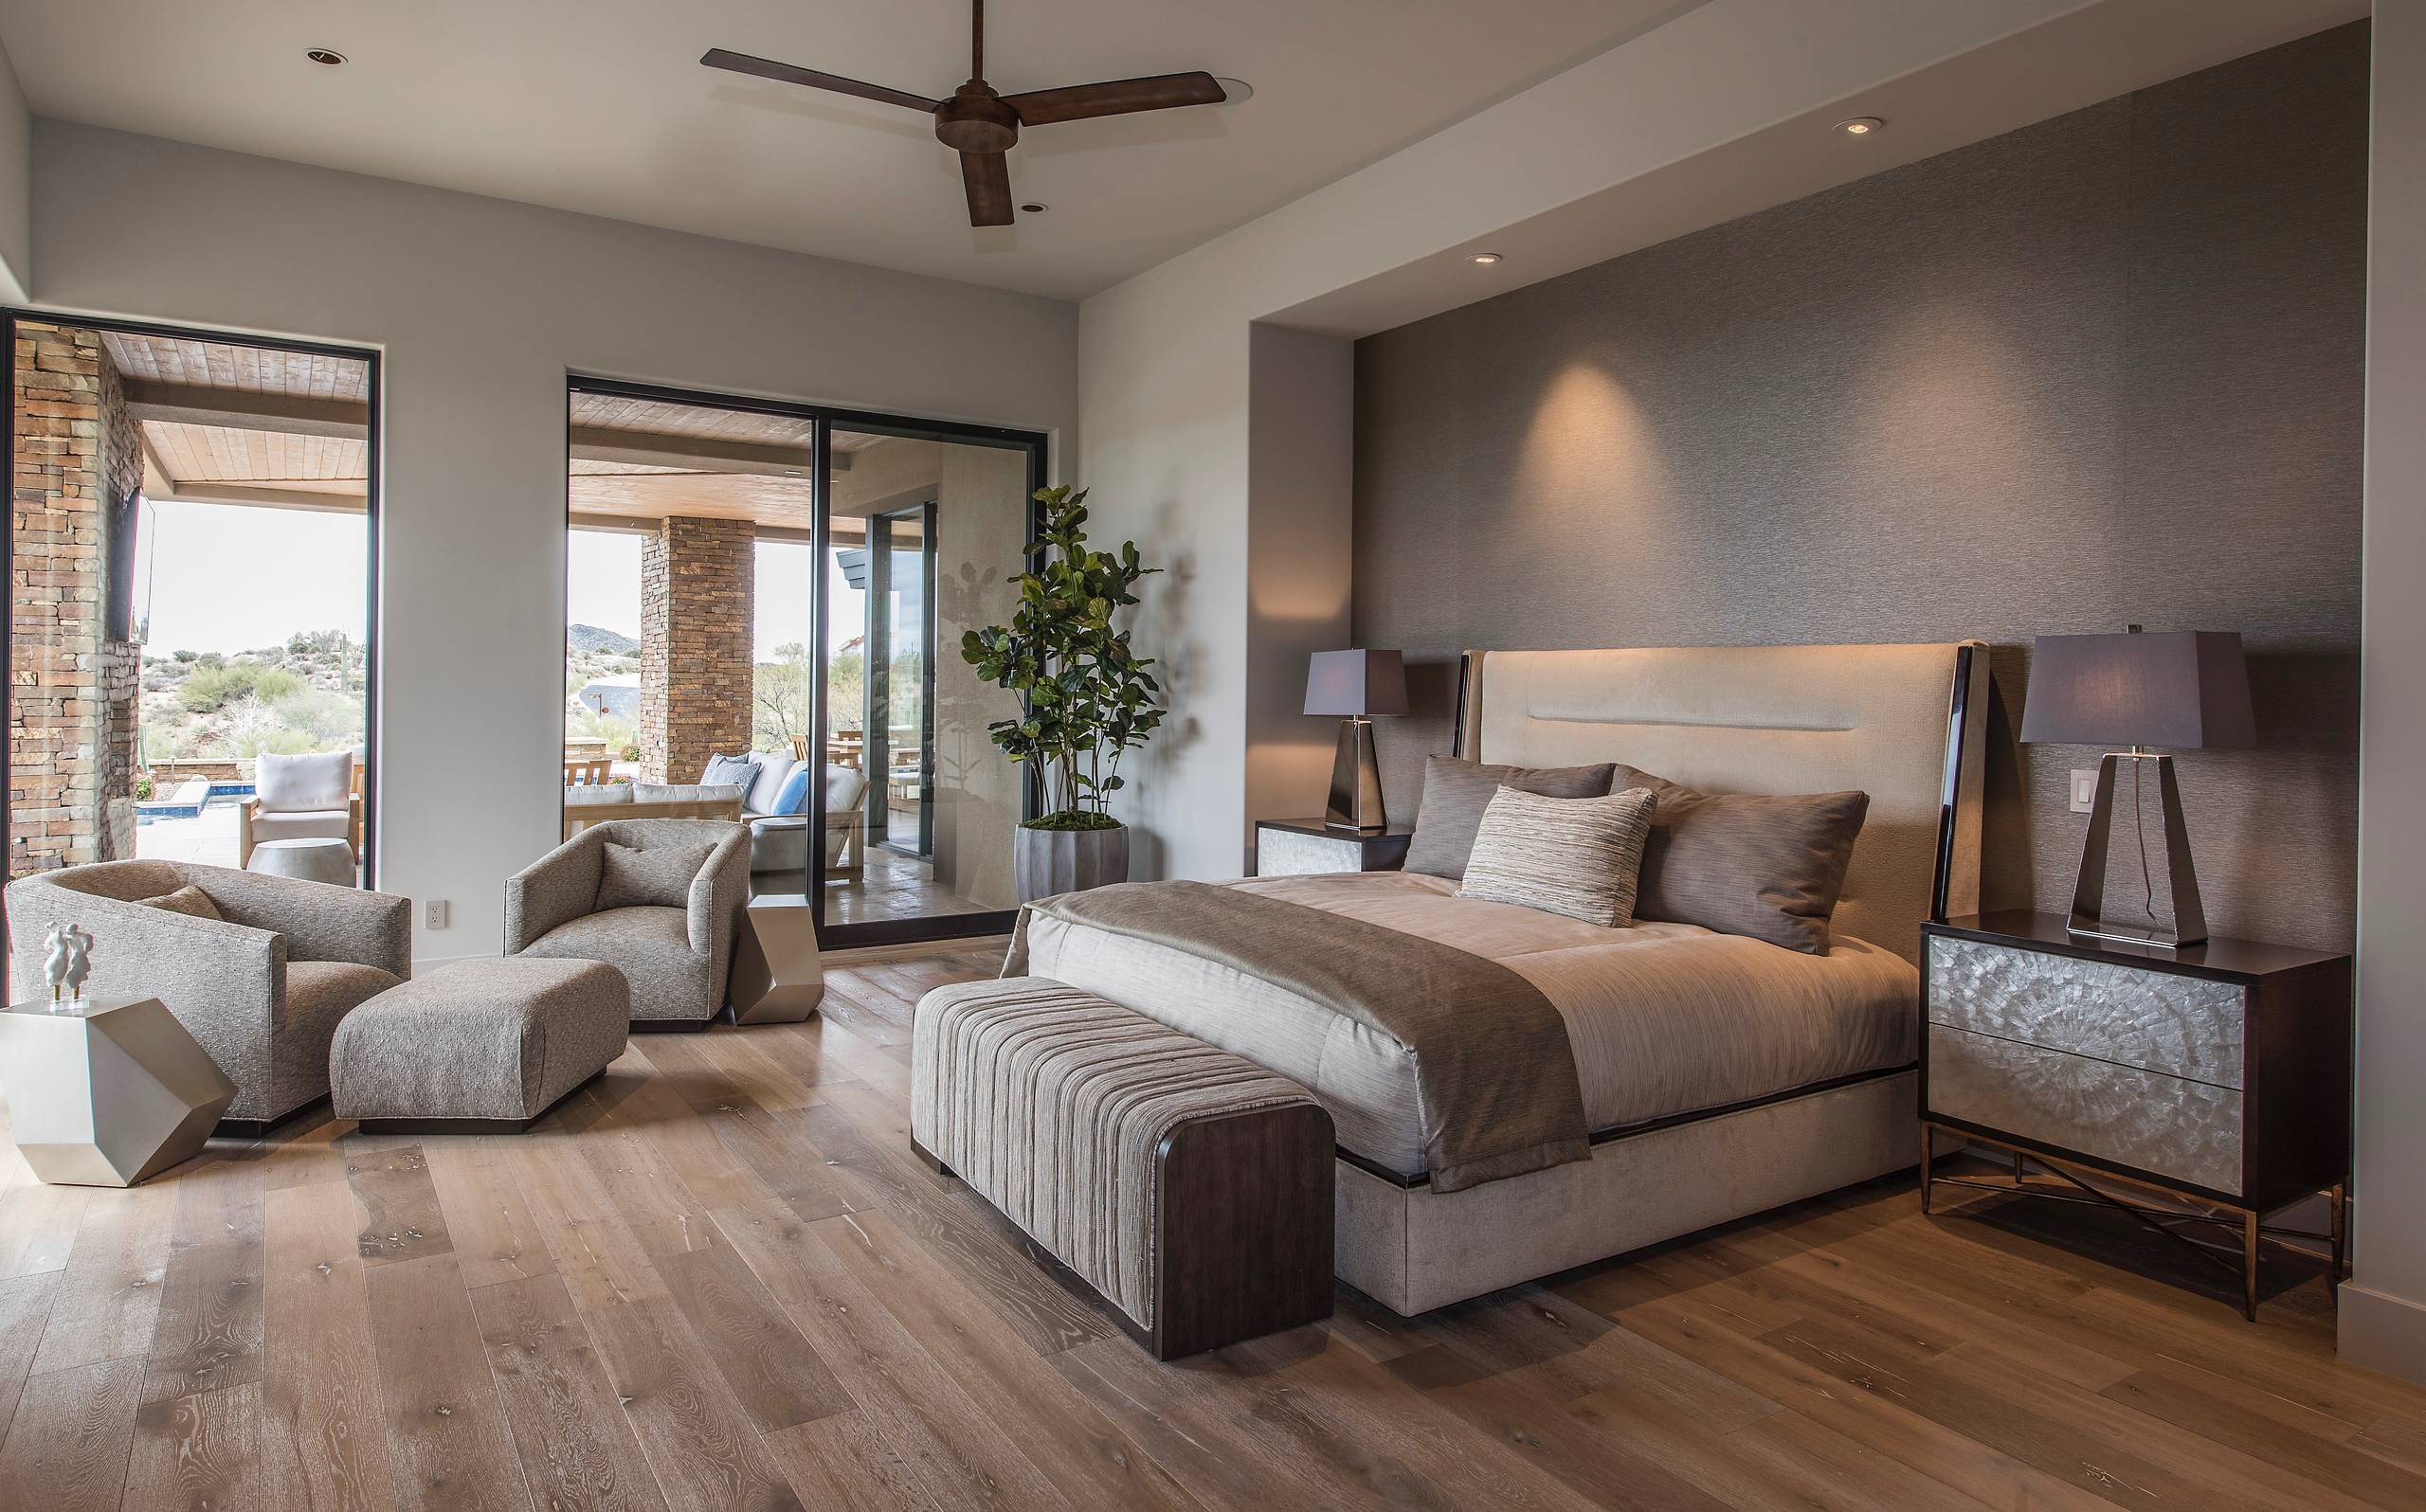 75 Beautiful Gray Bedroom Pictures Ideas July 2021 Houzz